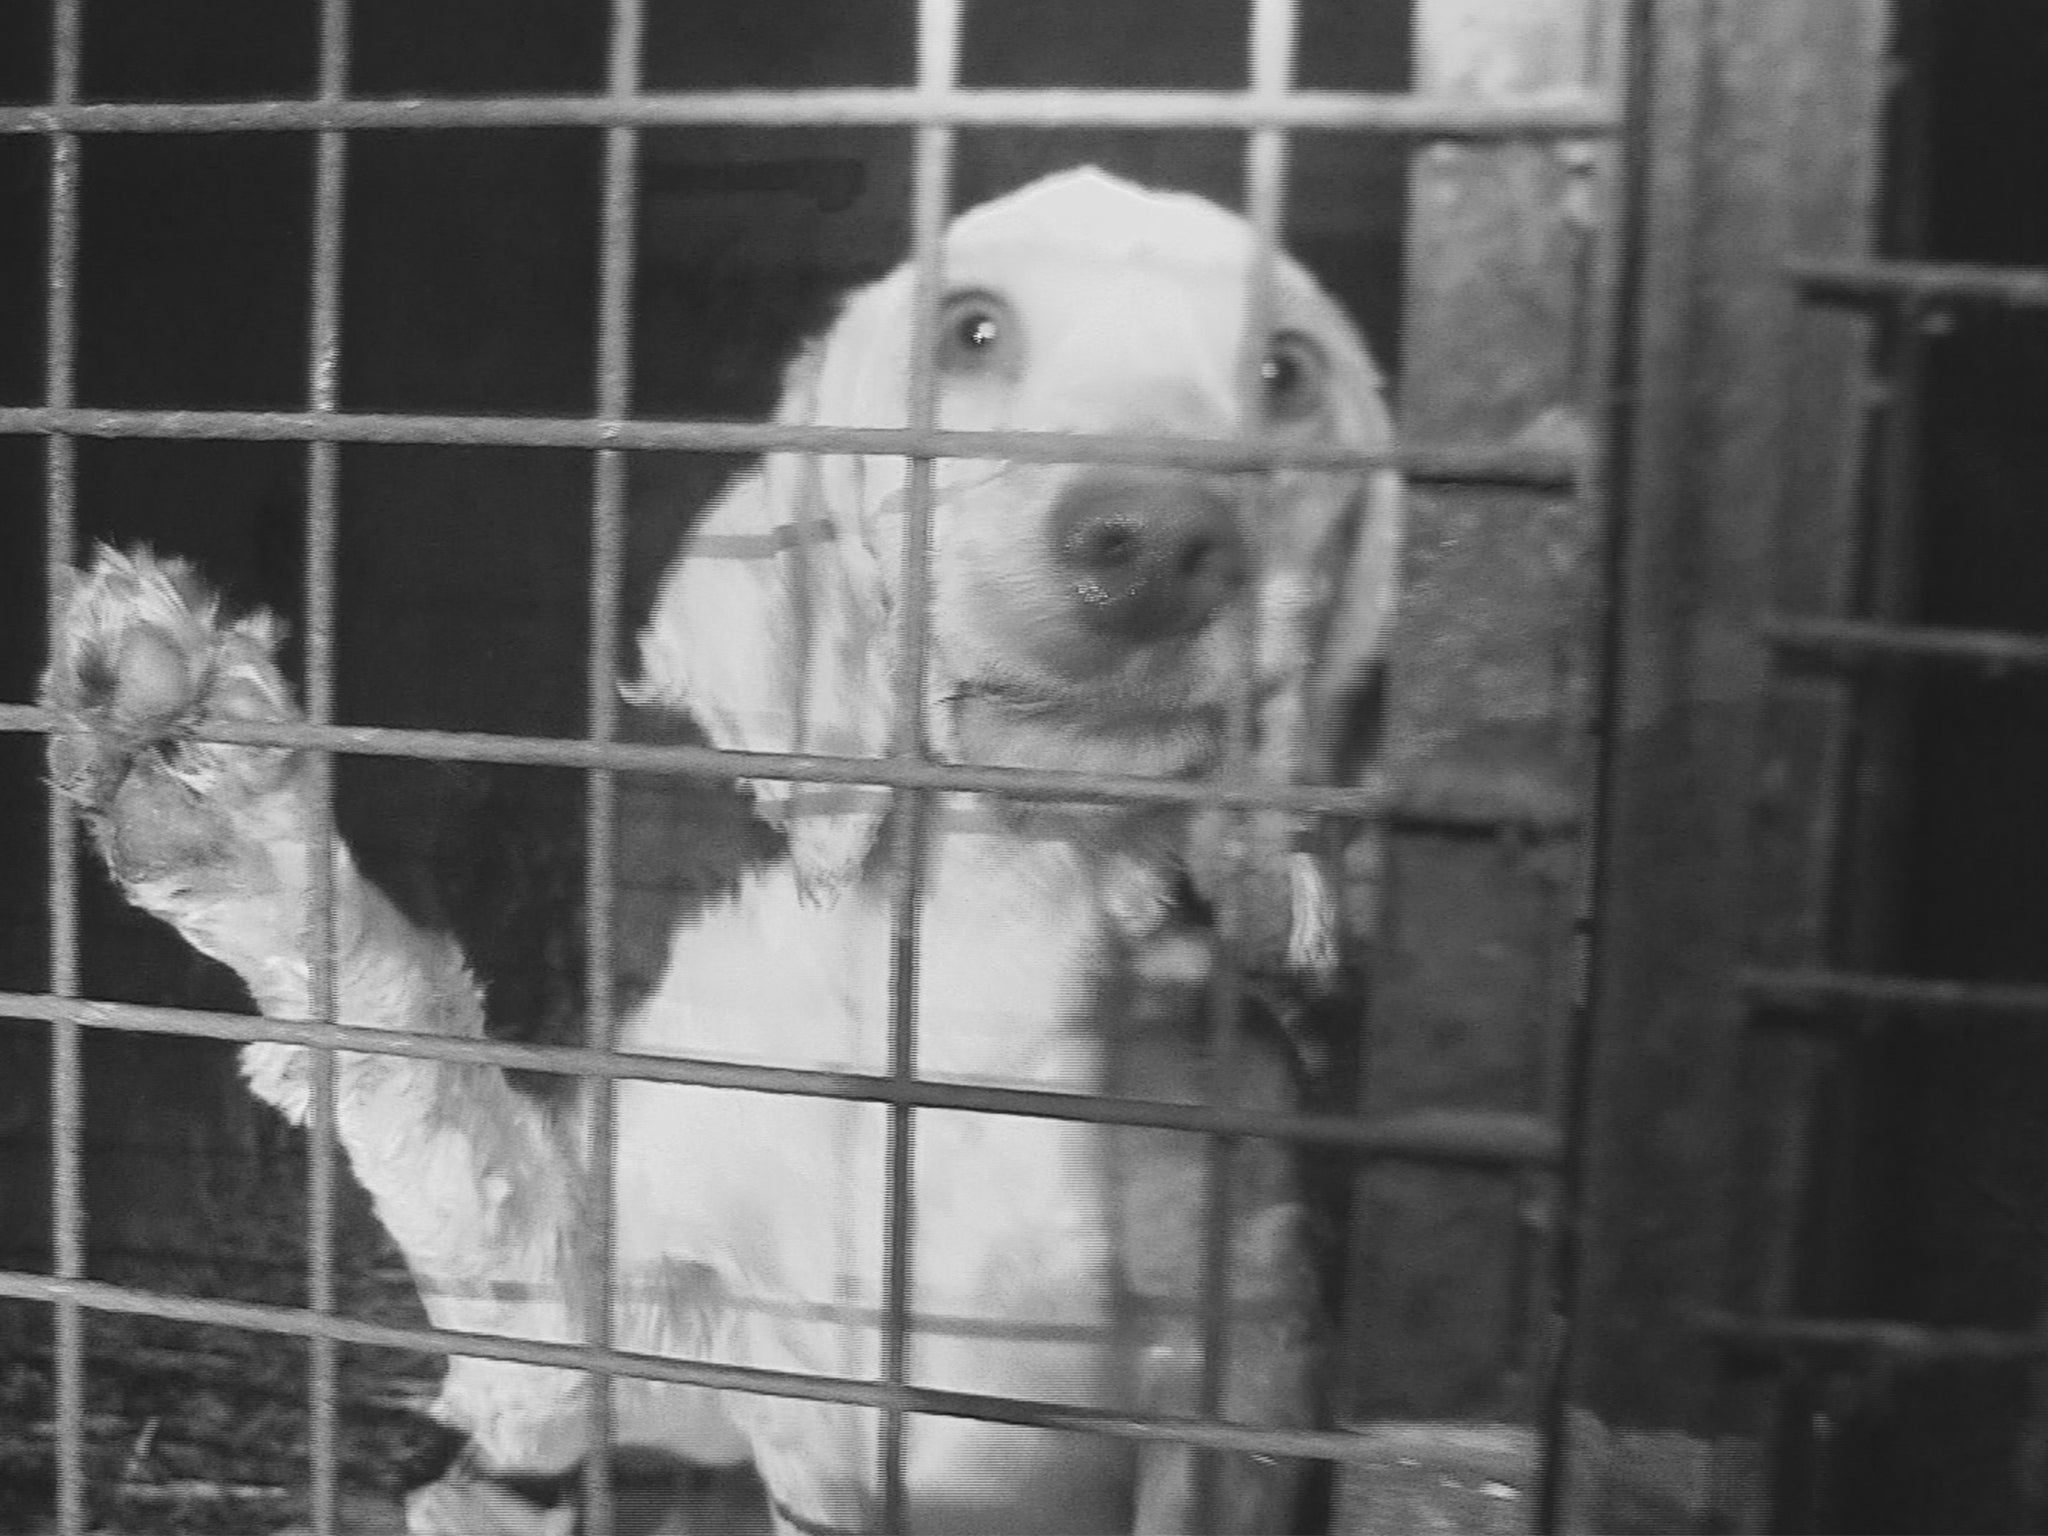 One of the caged dogs at the puppy farm investigated by the author